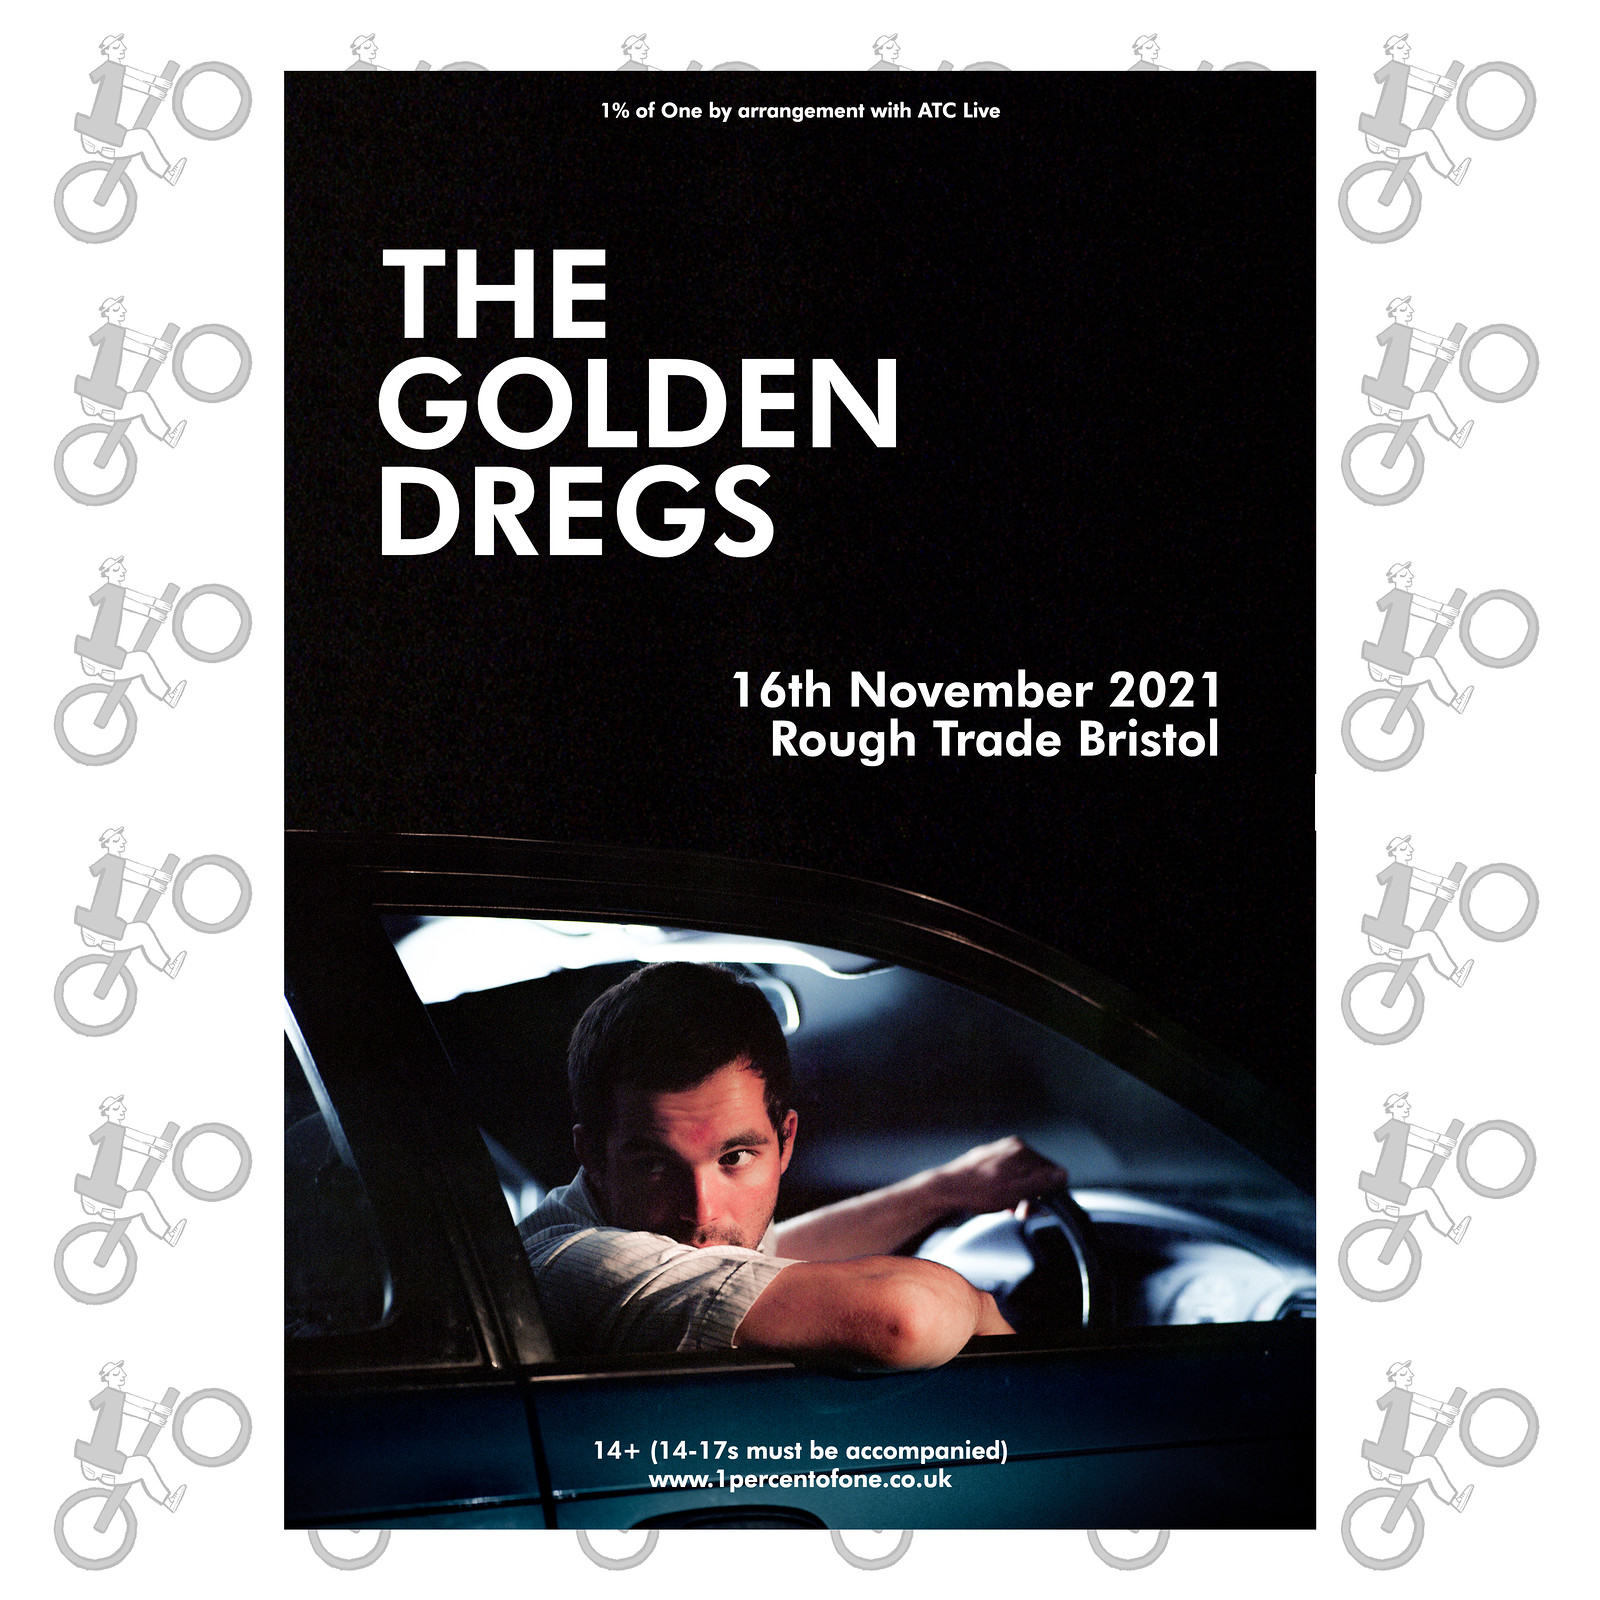 The Golden Dregs at Rough Trade Bristol